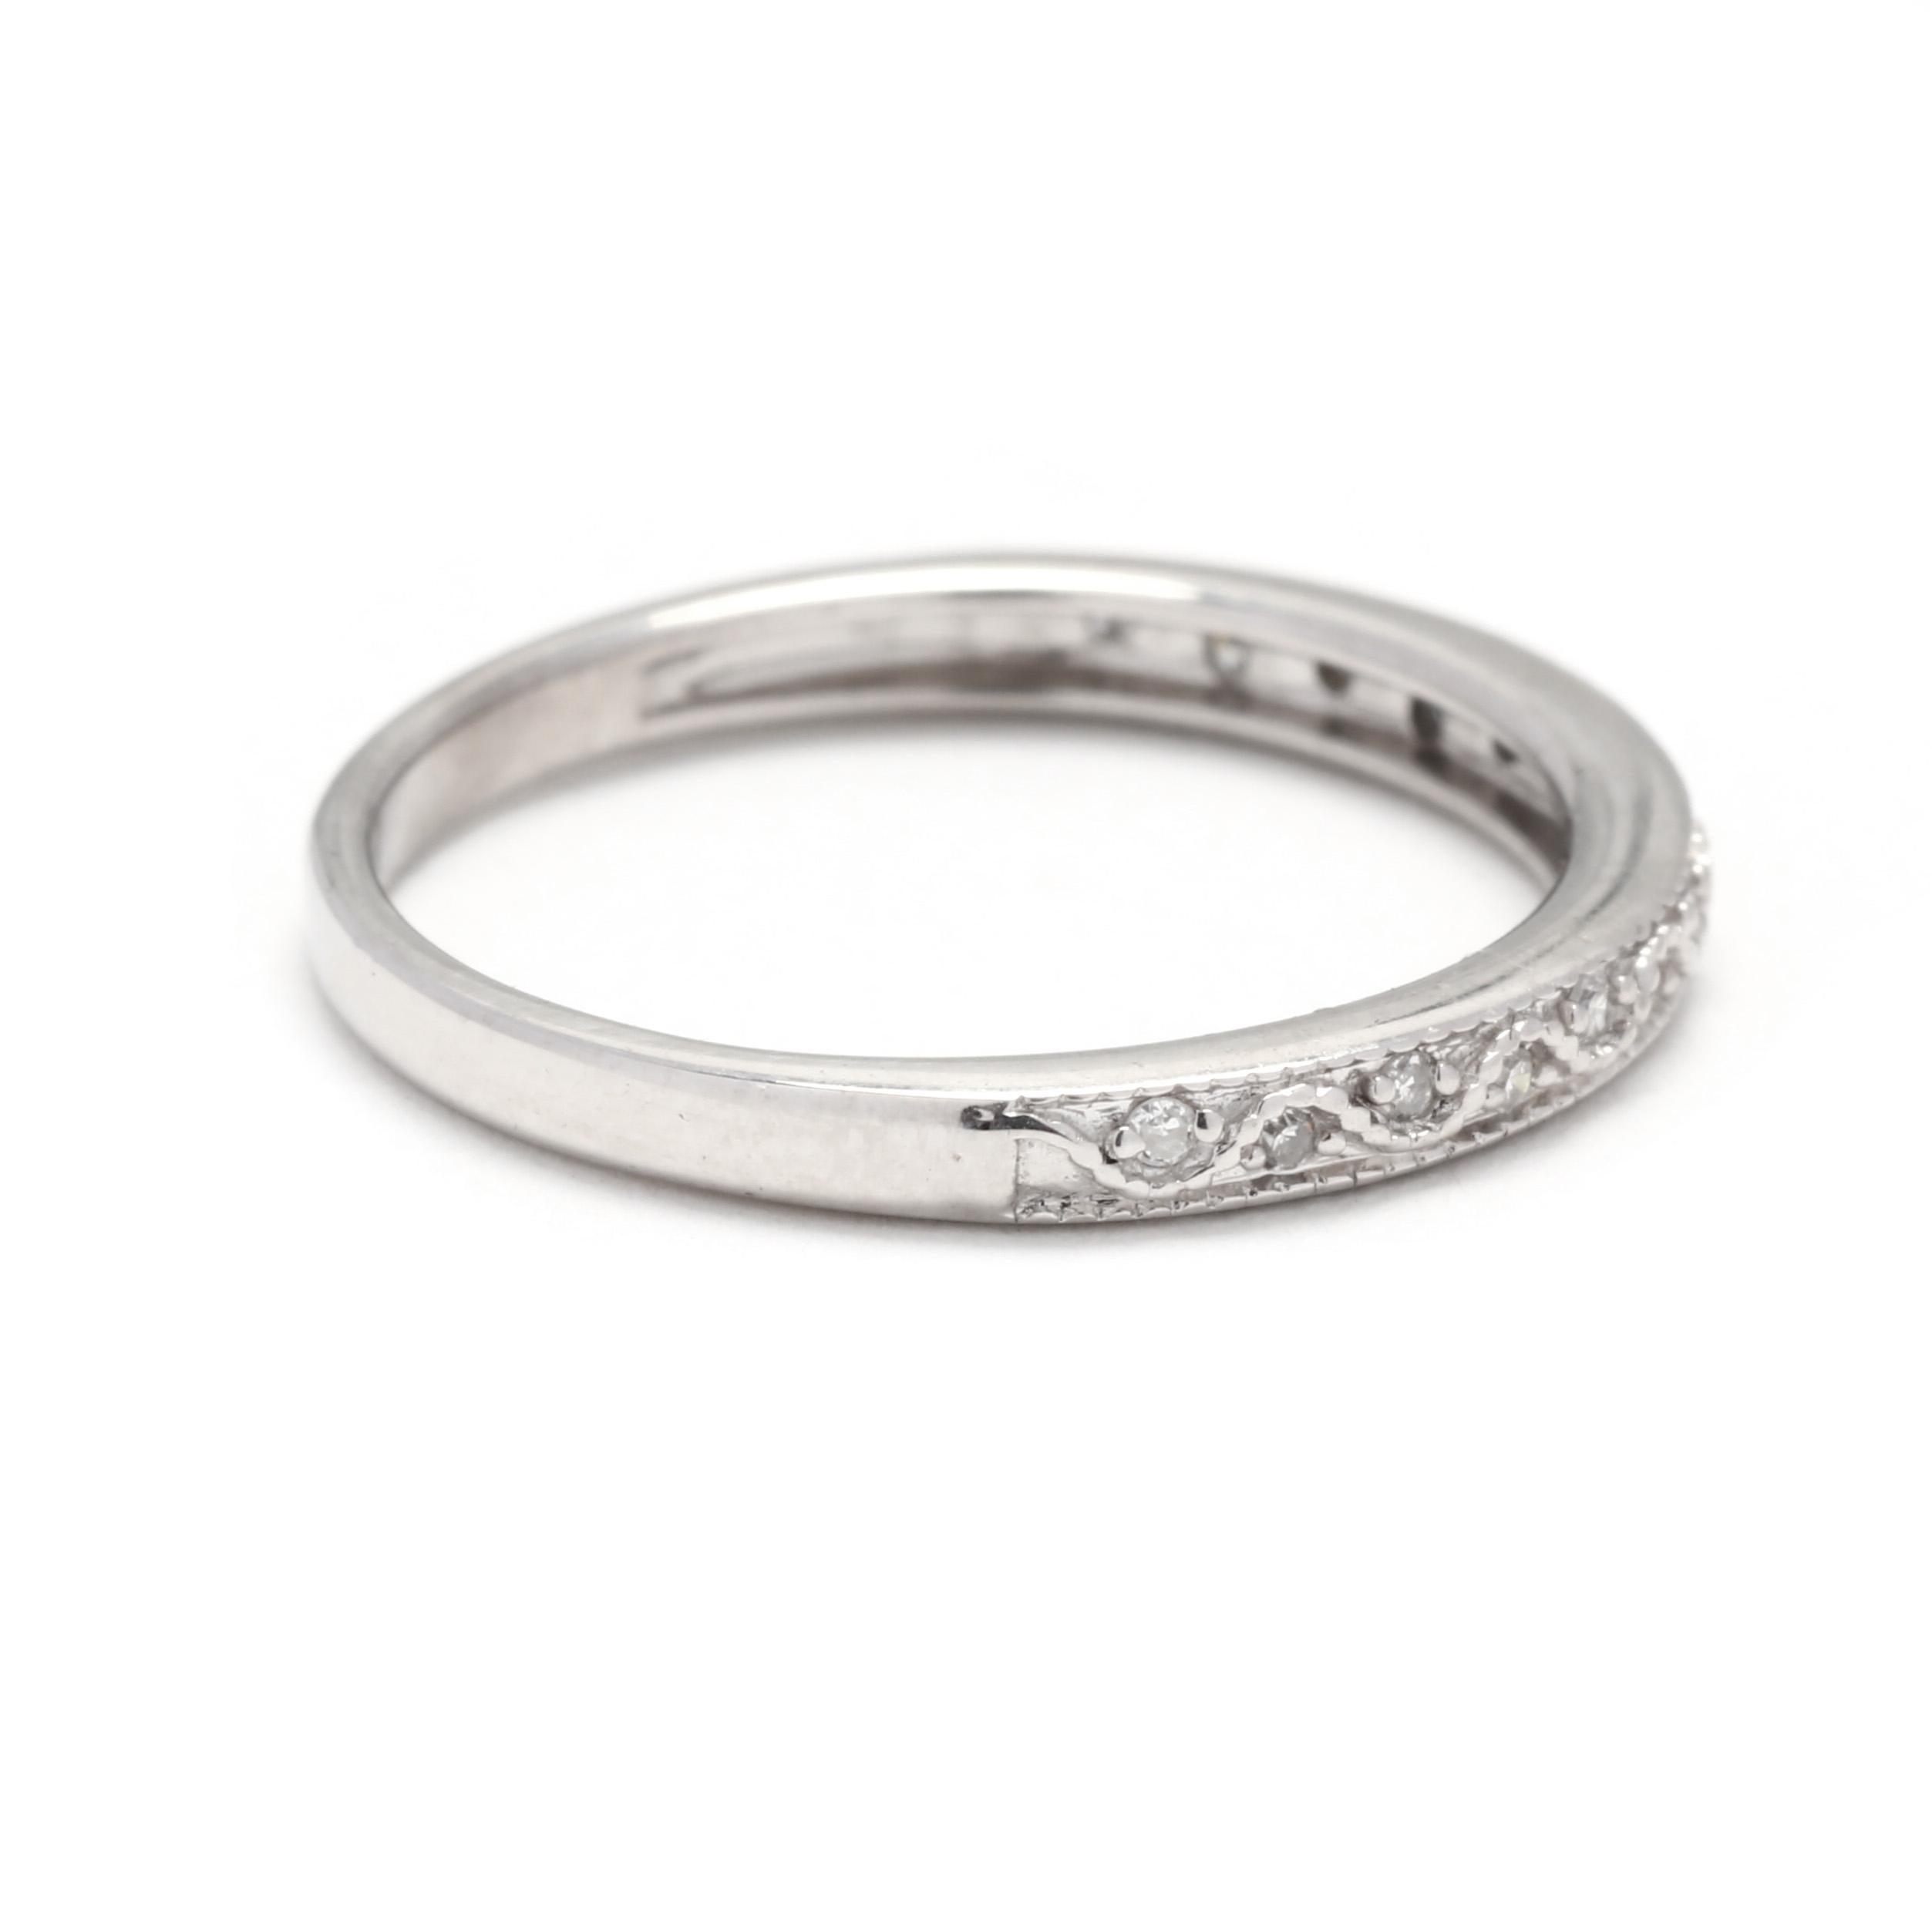 A vintage 10 karat white gold thin diamond wedding band. This stackable ring features a slightly tapered band with a wave design set with single cut round diamonds weighing approximately .05 total carats.

Stones:
- diamonds, 15 stones
- single cut